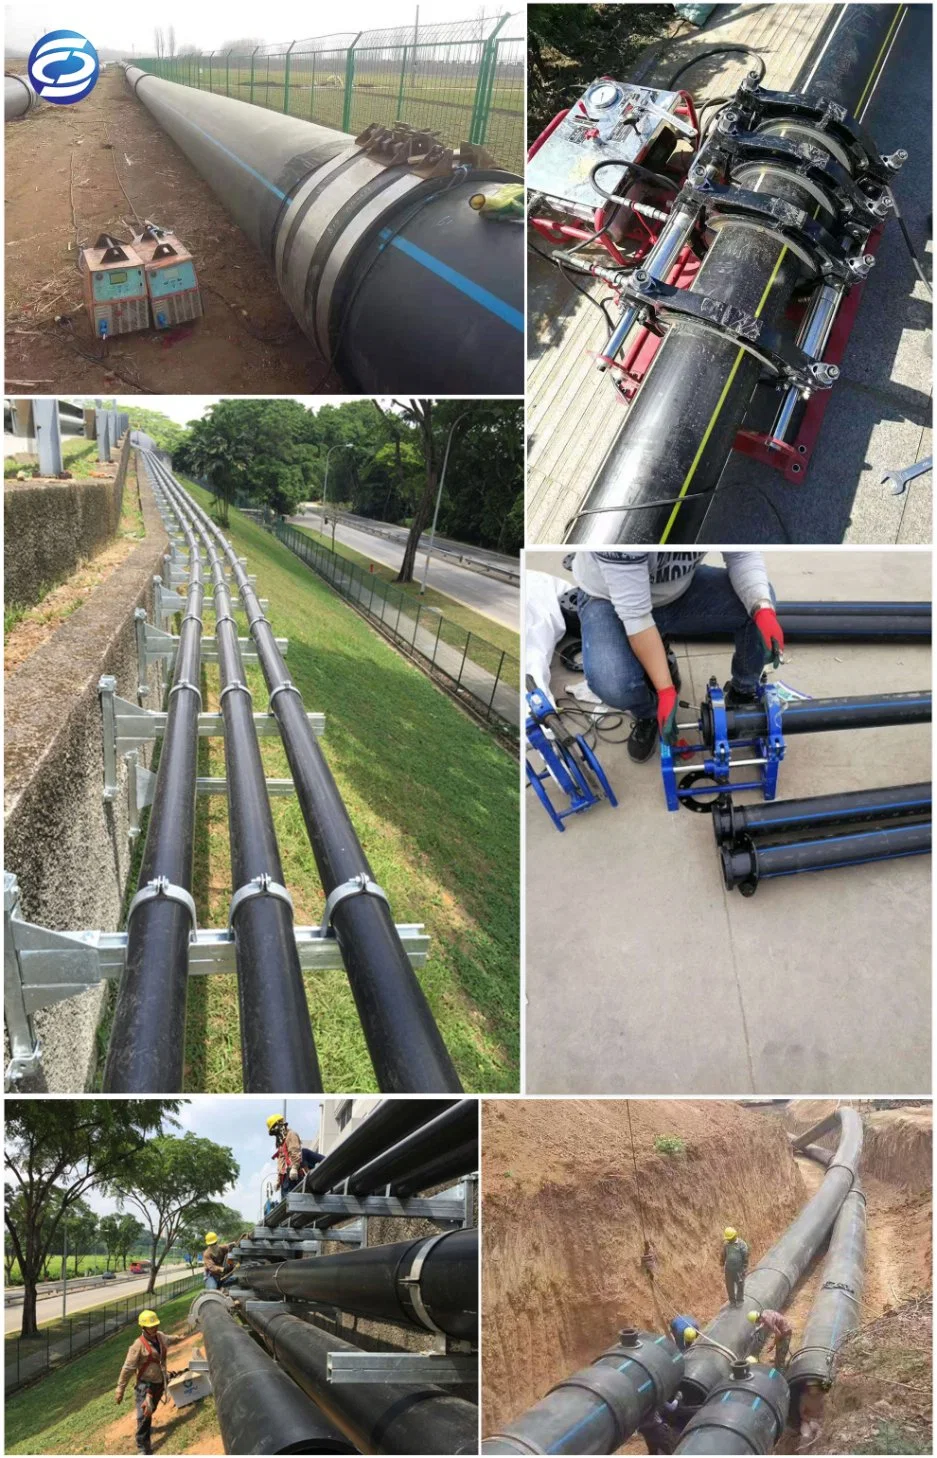 High Density Polyethylene HDPE Pipe for Potable Water Supply